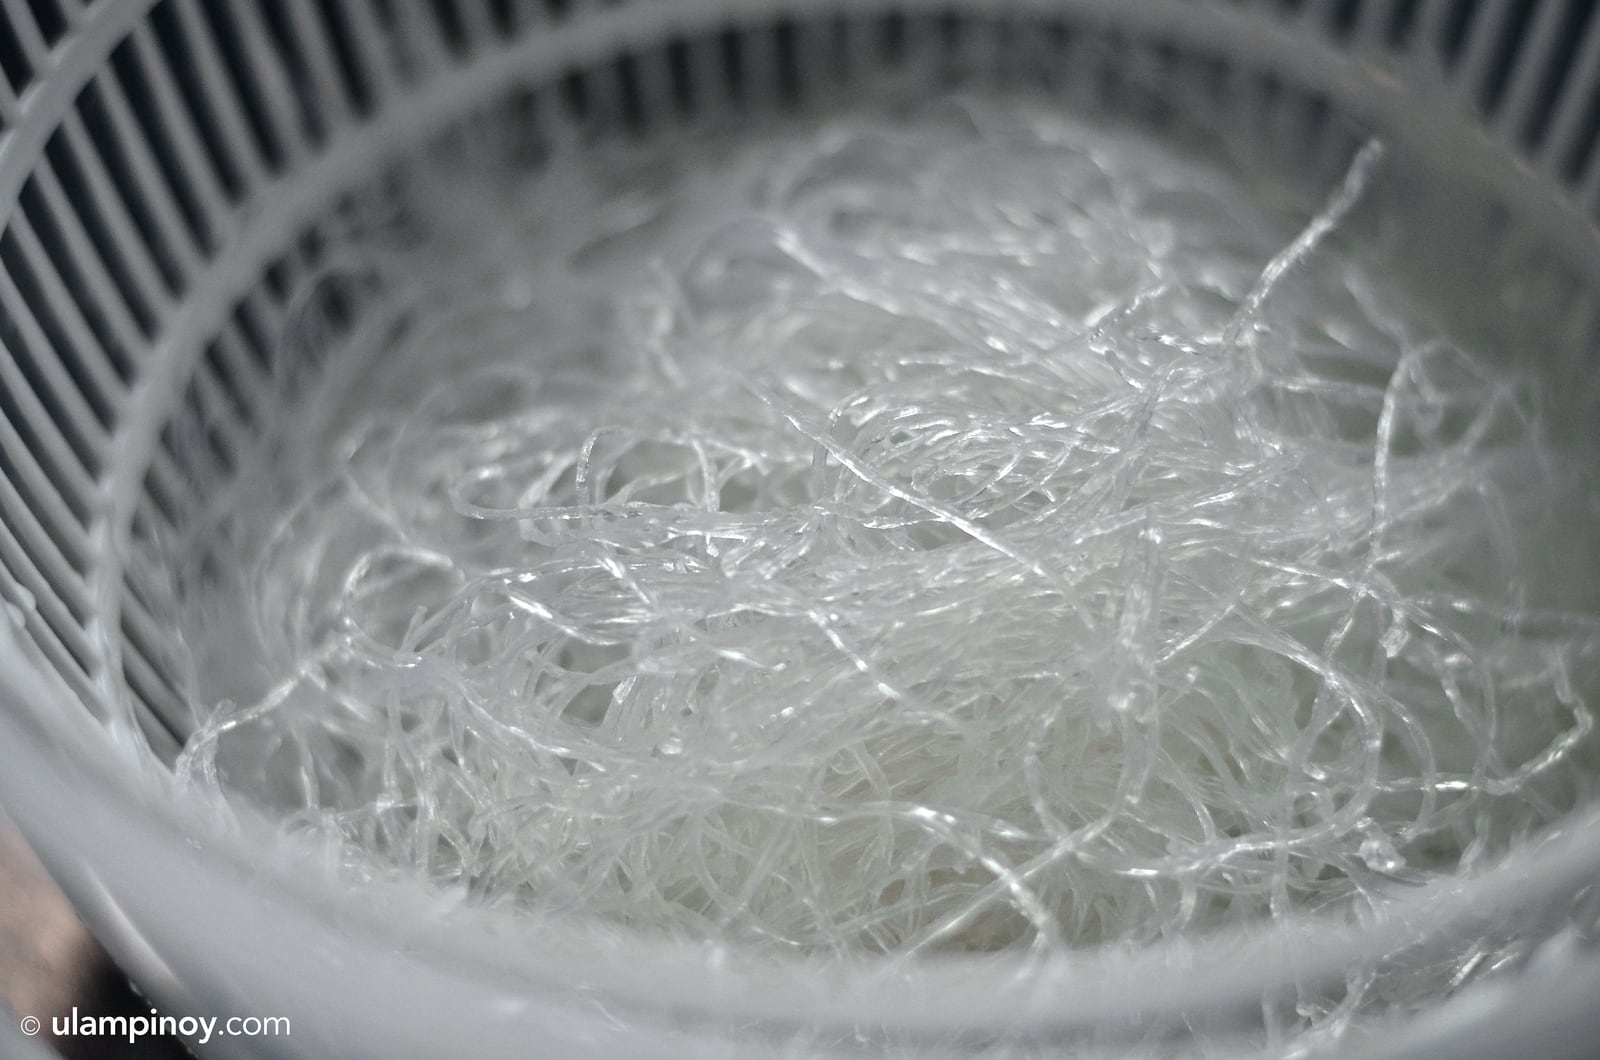 Also known as glass noodles